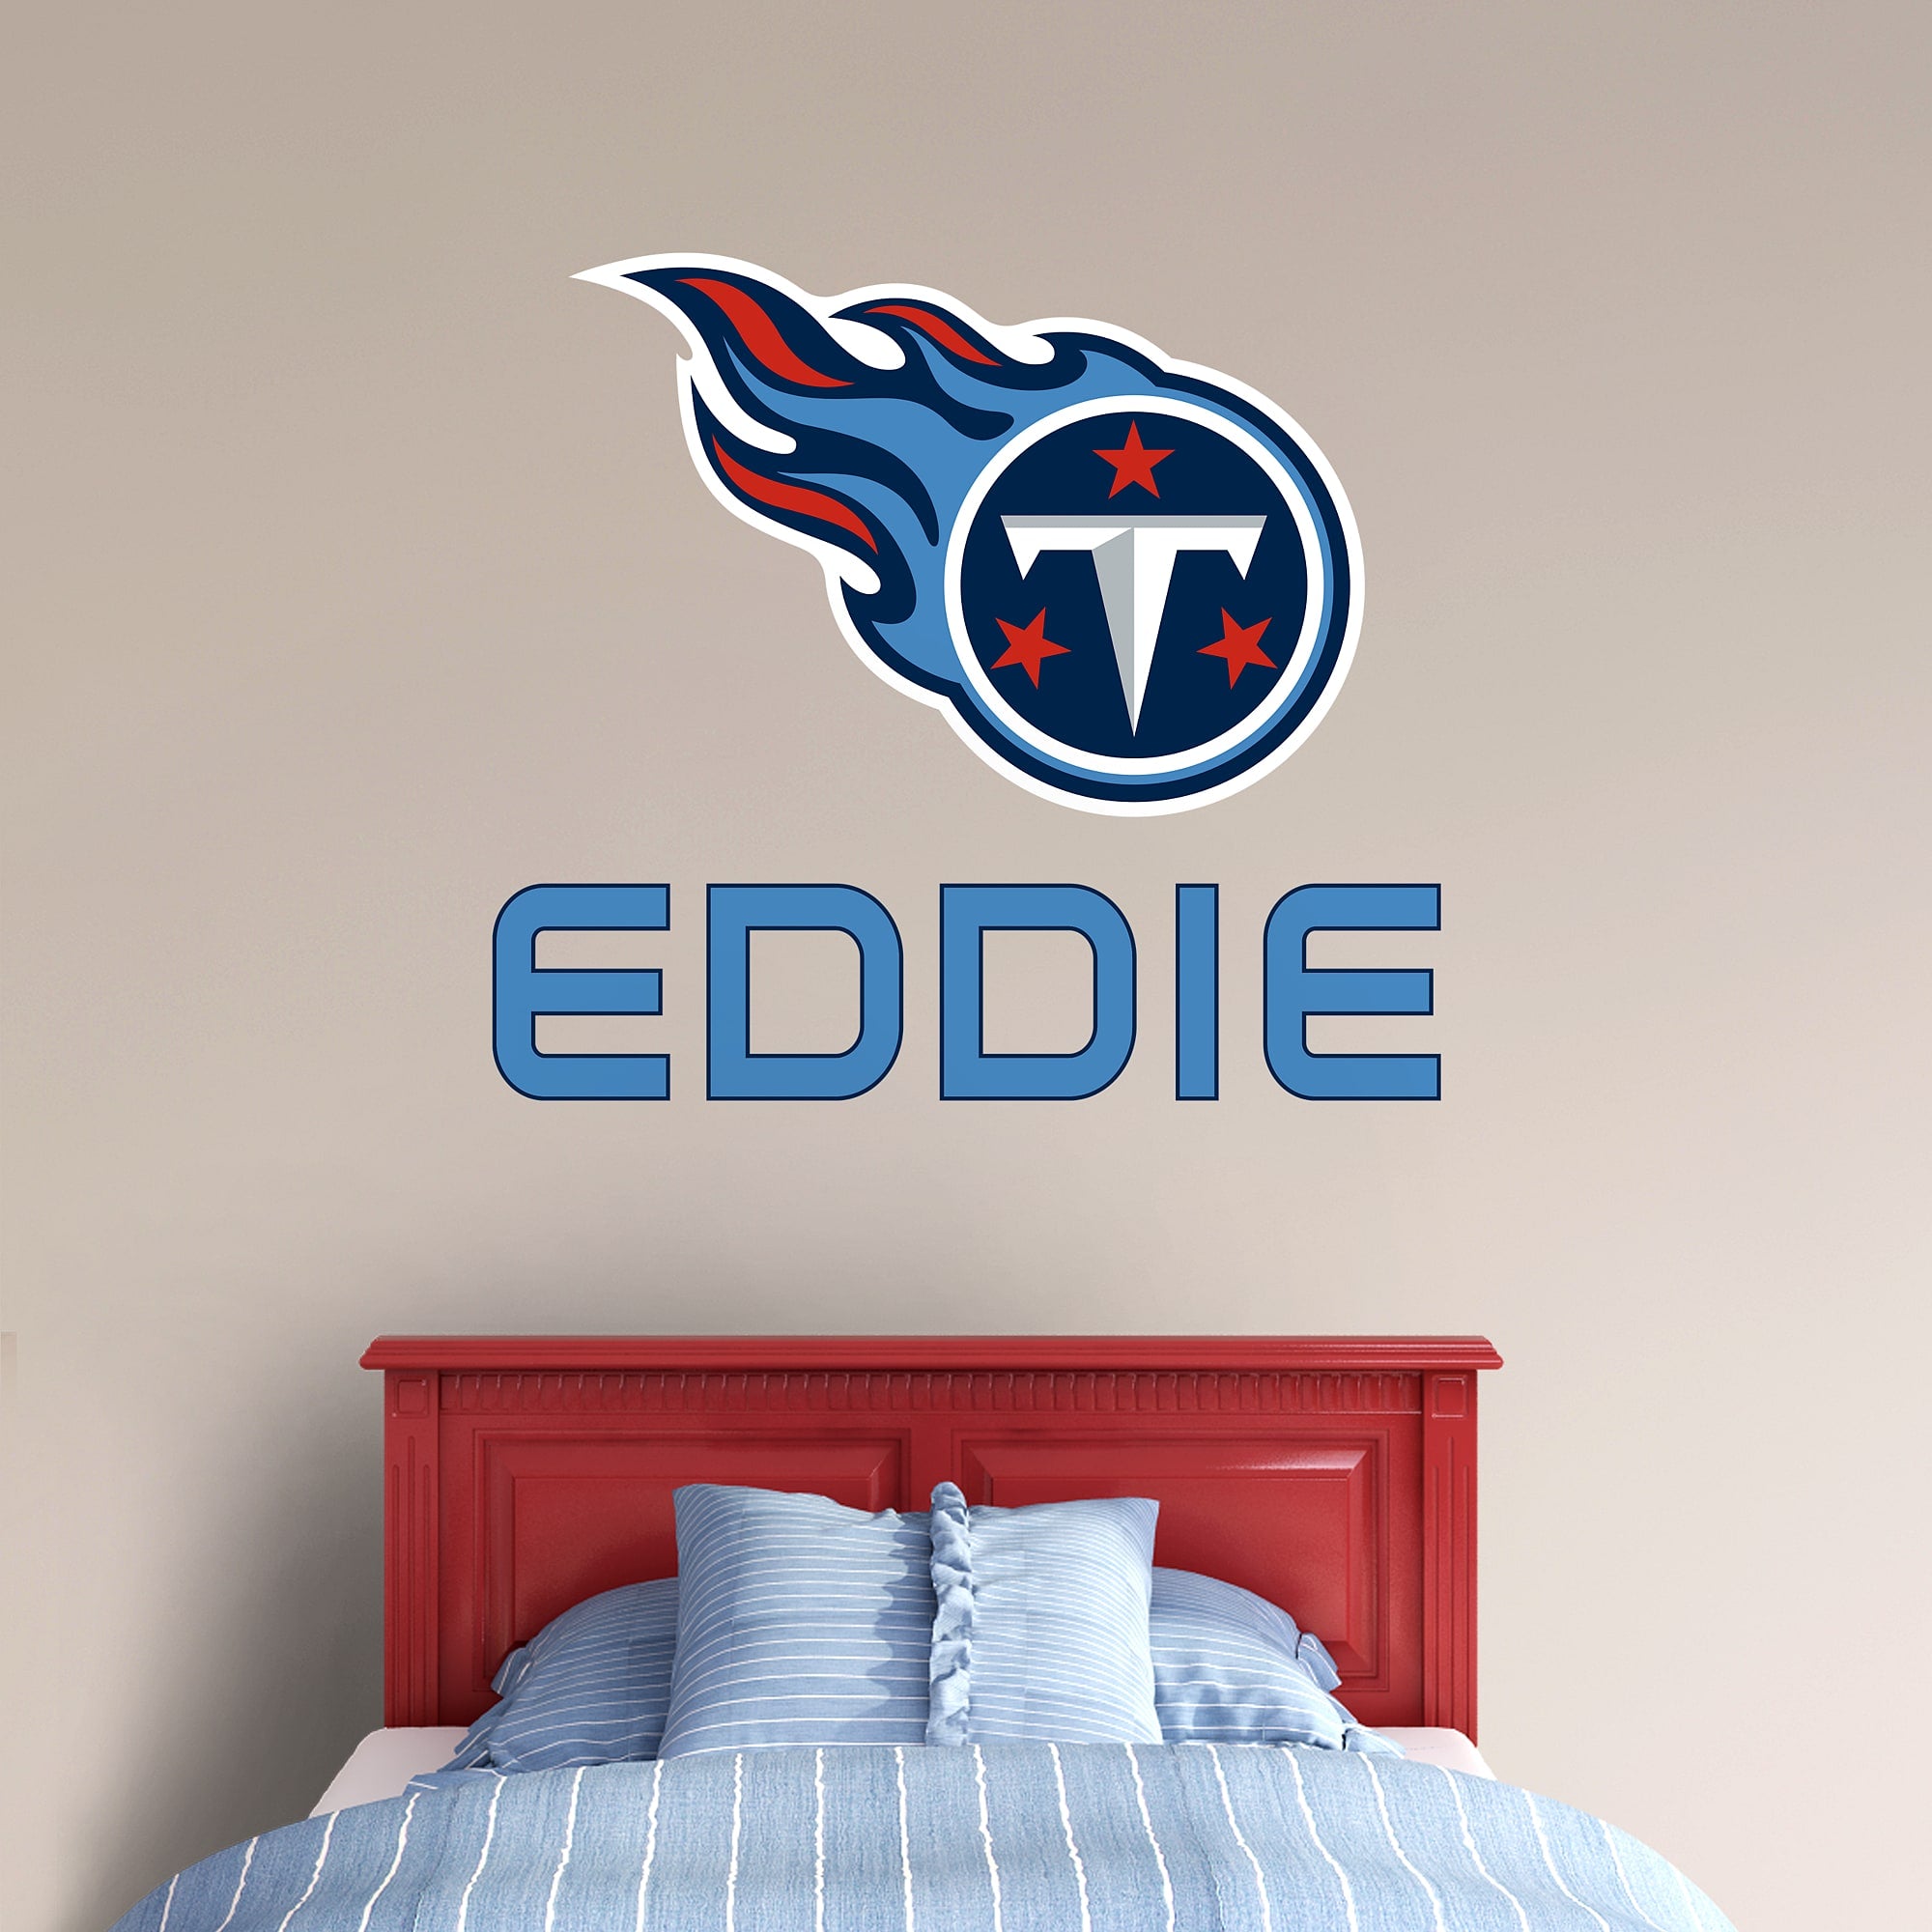 Tennessee Titans: Stacked Personalized Name - Officially Licensed NFL Transfer Decal in Baby Blue (52"W x 39.5"H) by Fathead | V